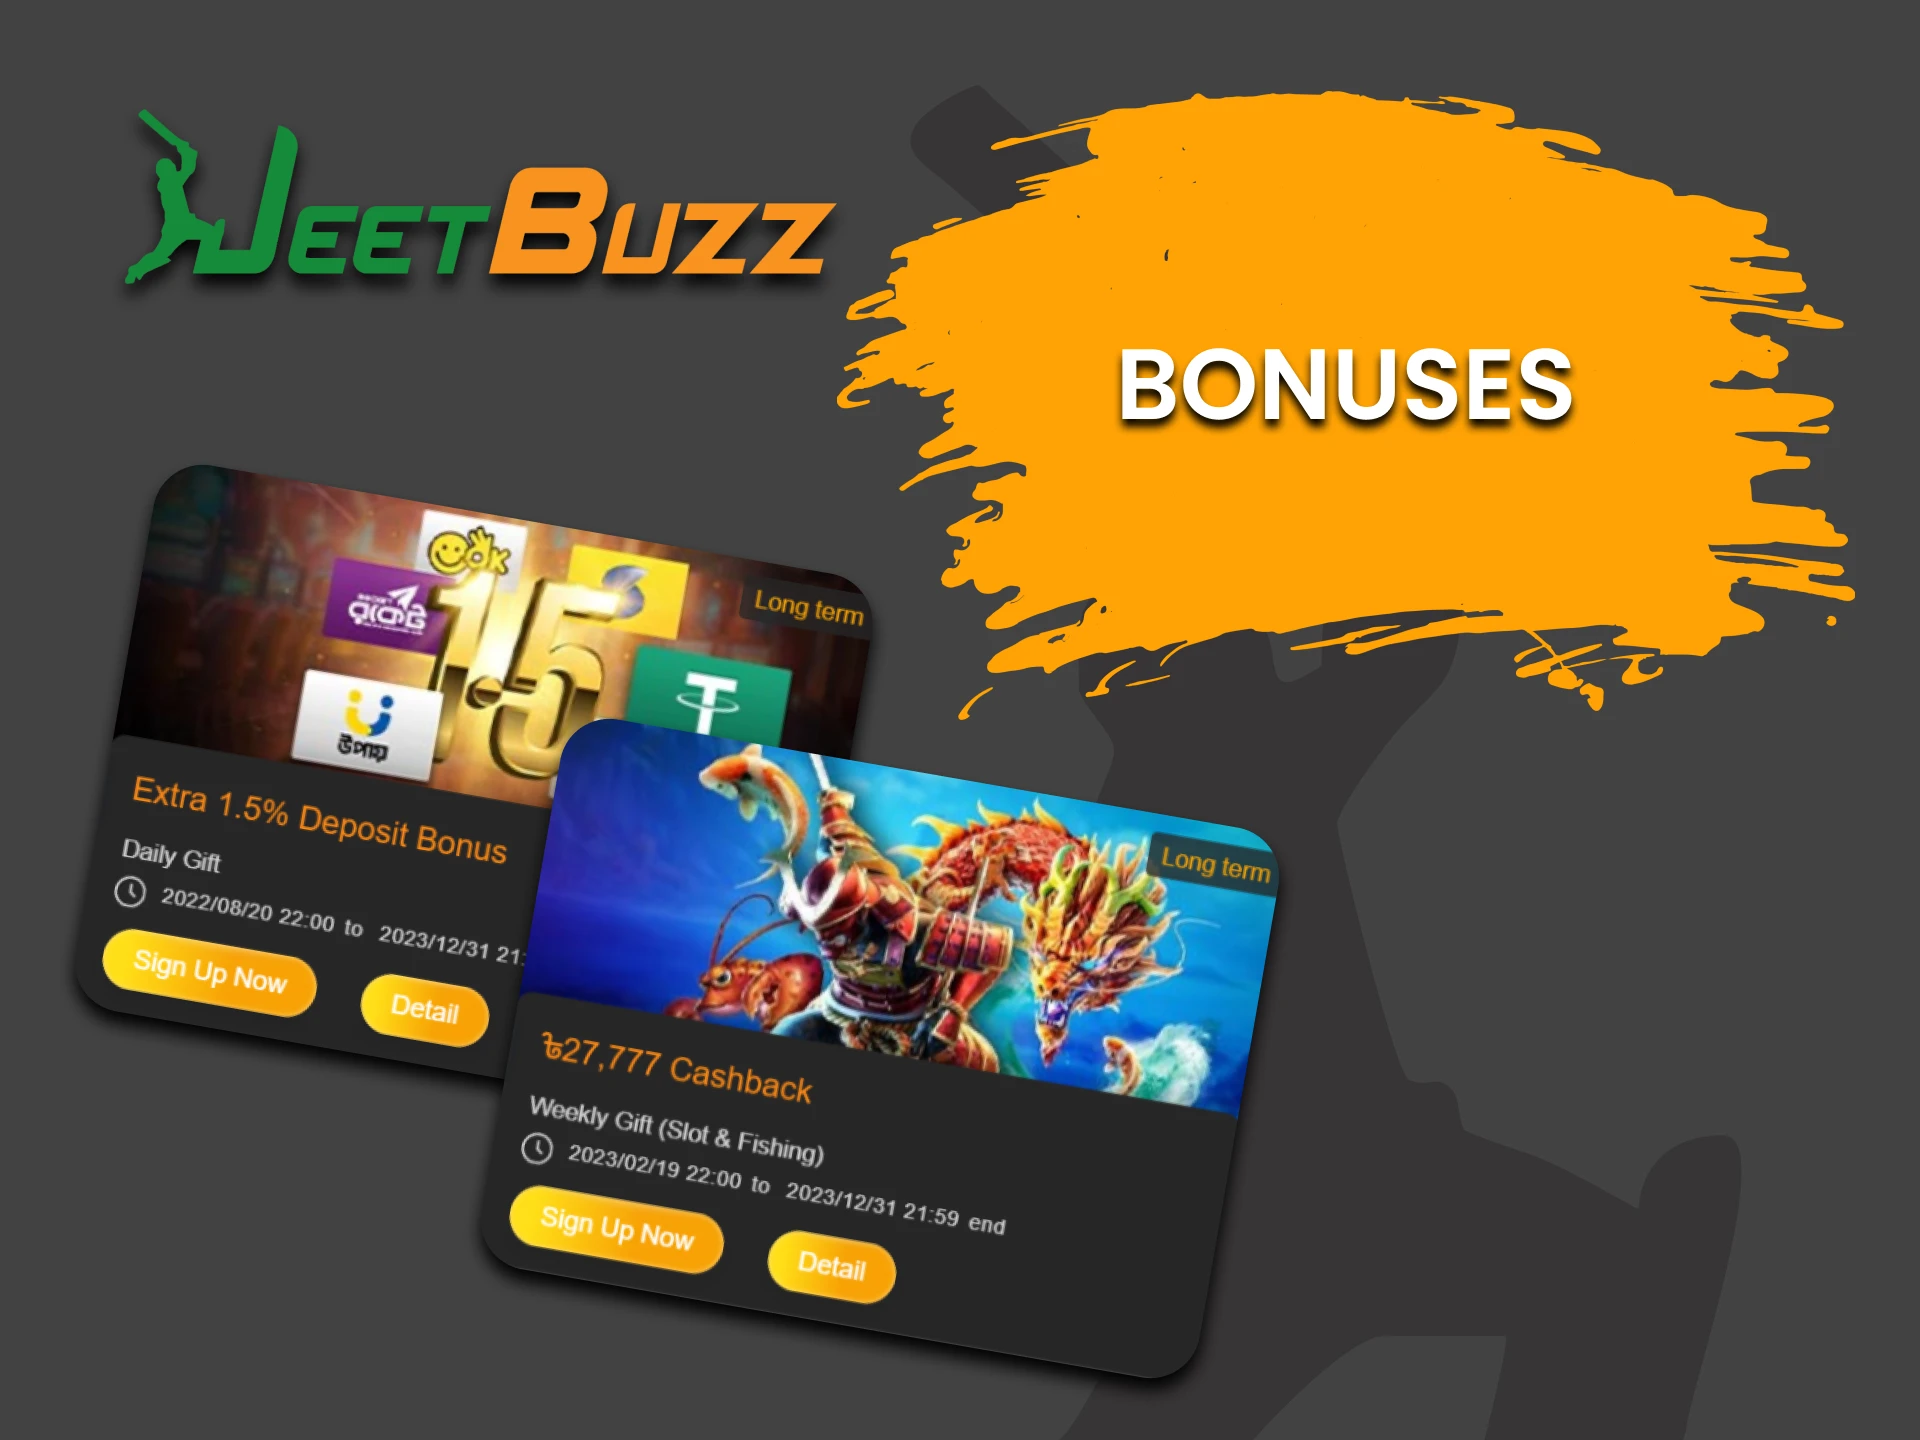 JeetBuzz gives bonuses to users for playing Lottery.